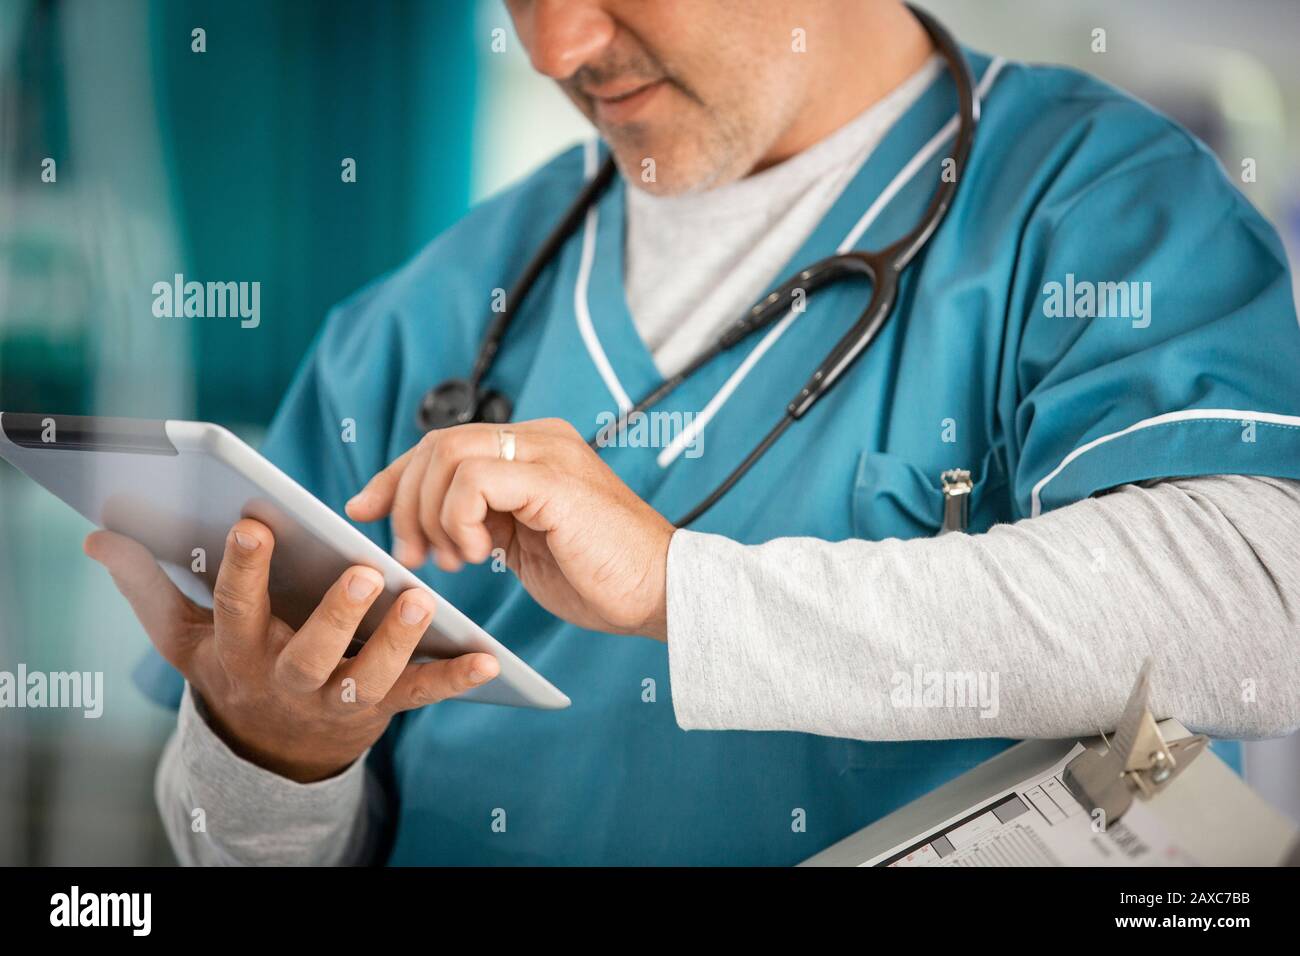 Male doctor using digital tablet Stock Photo